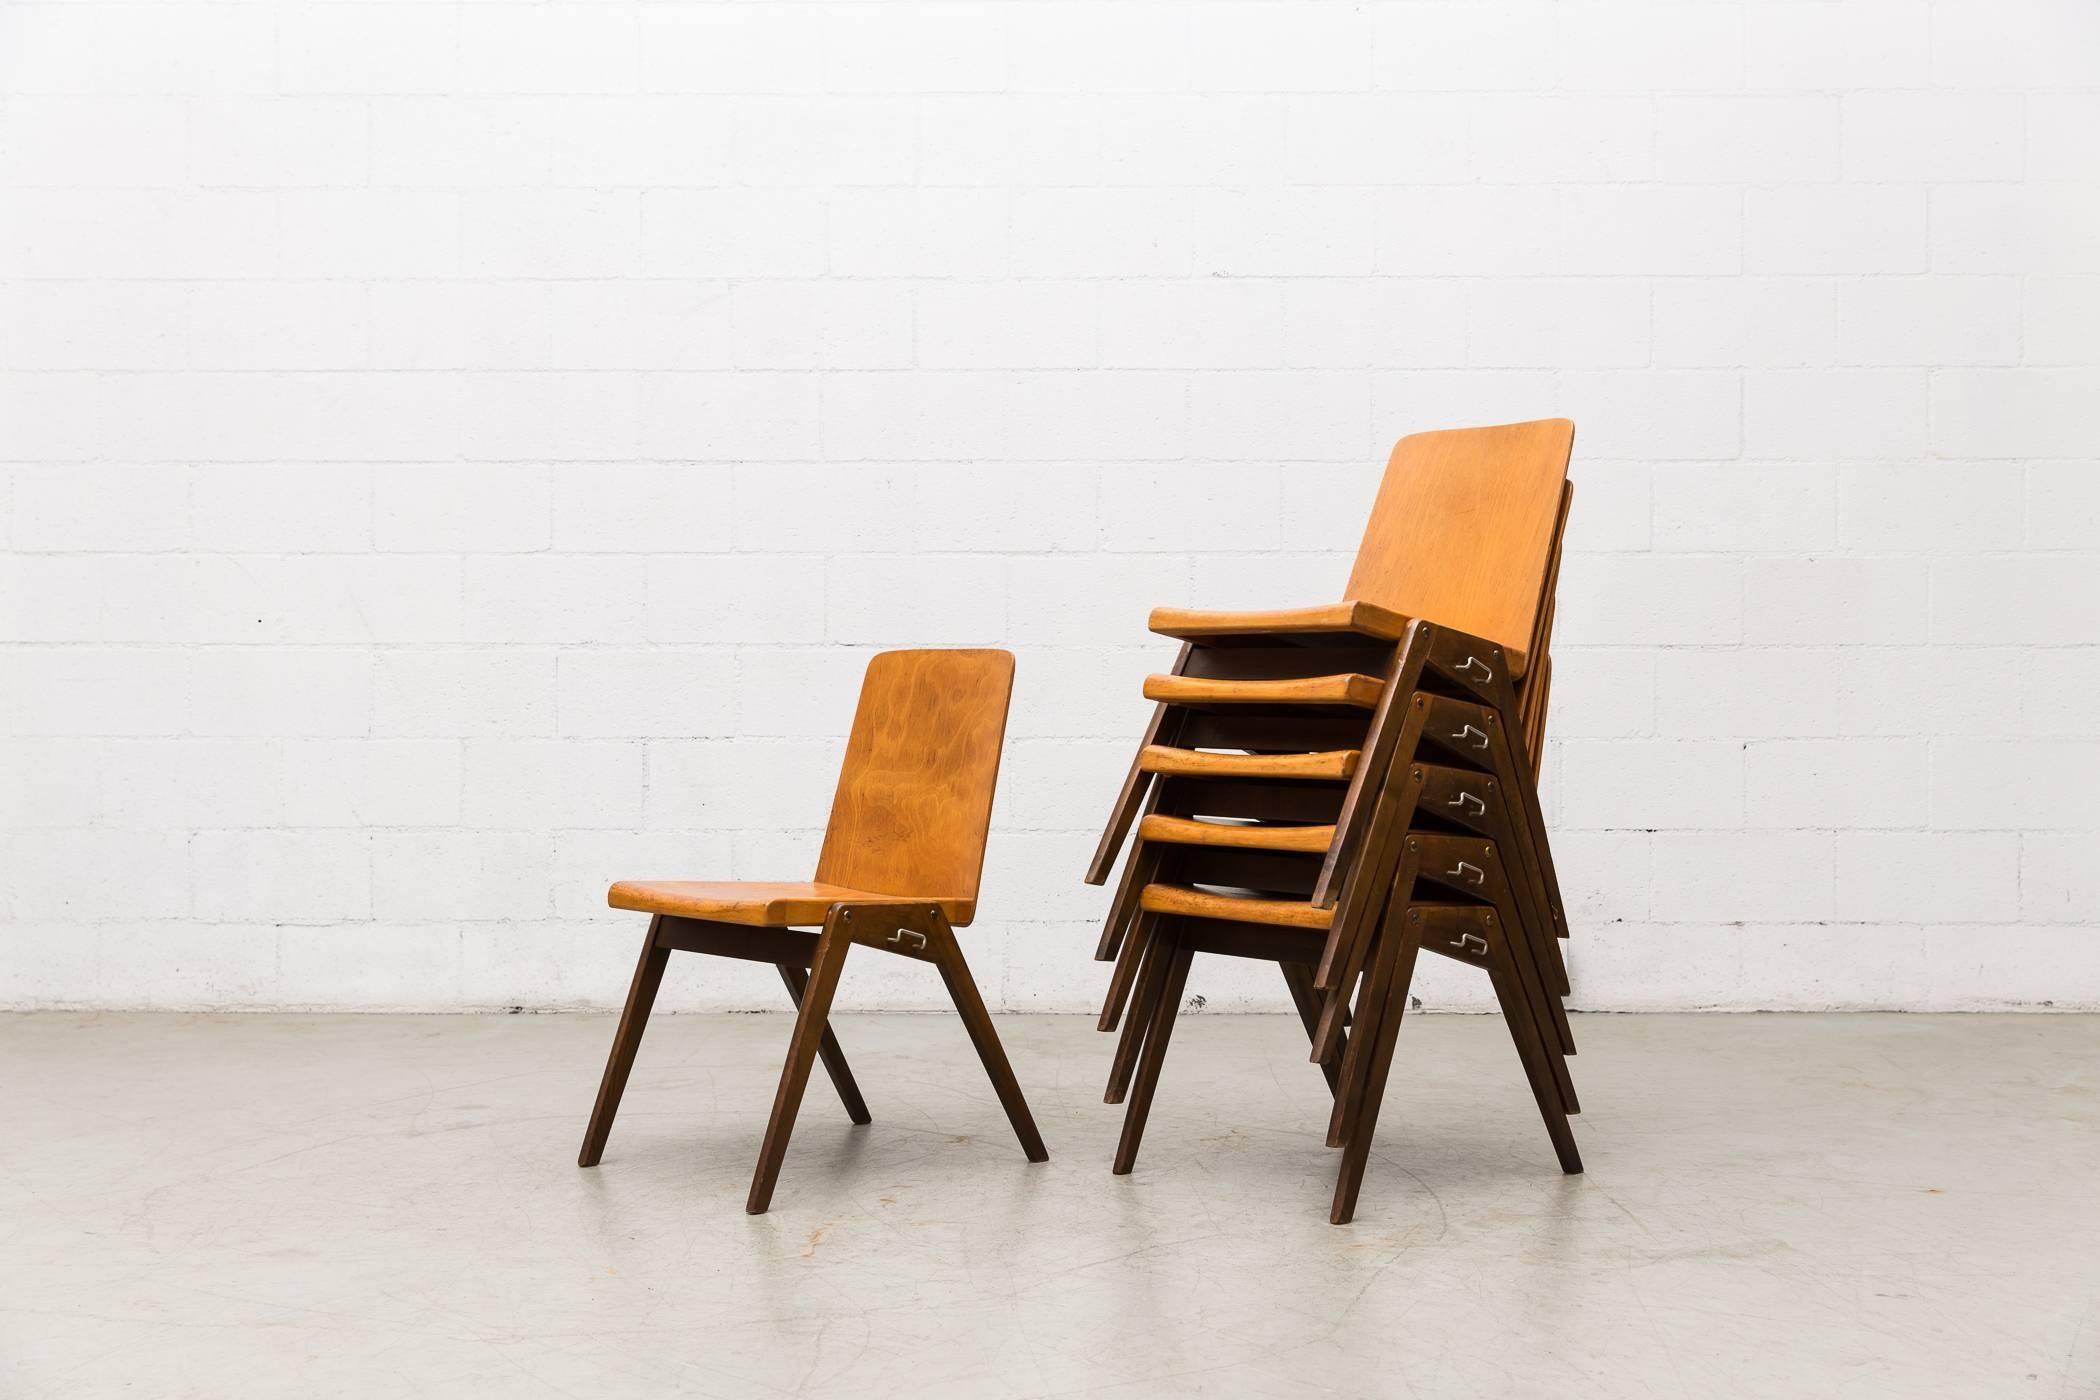 Gorgeous Roland Rainer style stacking school chairs. Light natural wood seats and chocolate wood legs. Hooks on sides used to connect chairs for group/bench seating. Original condition.